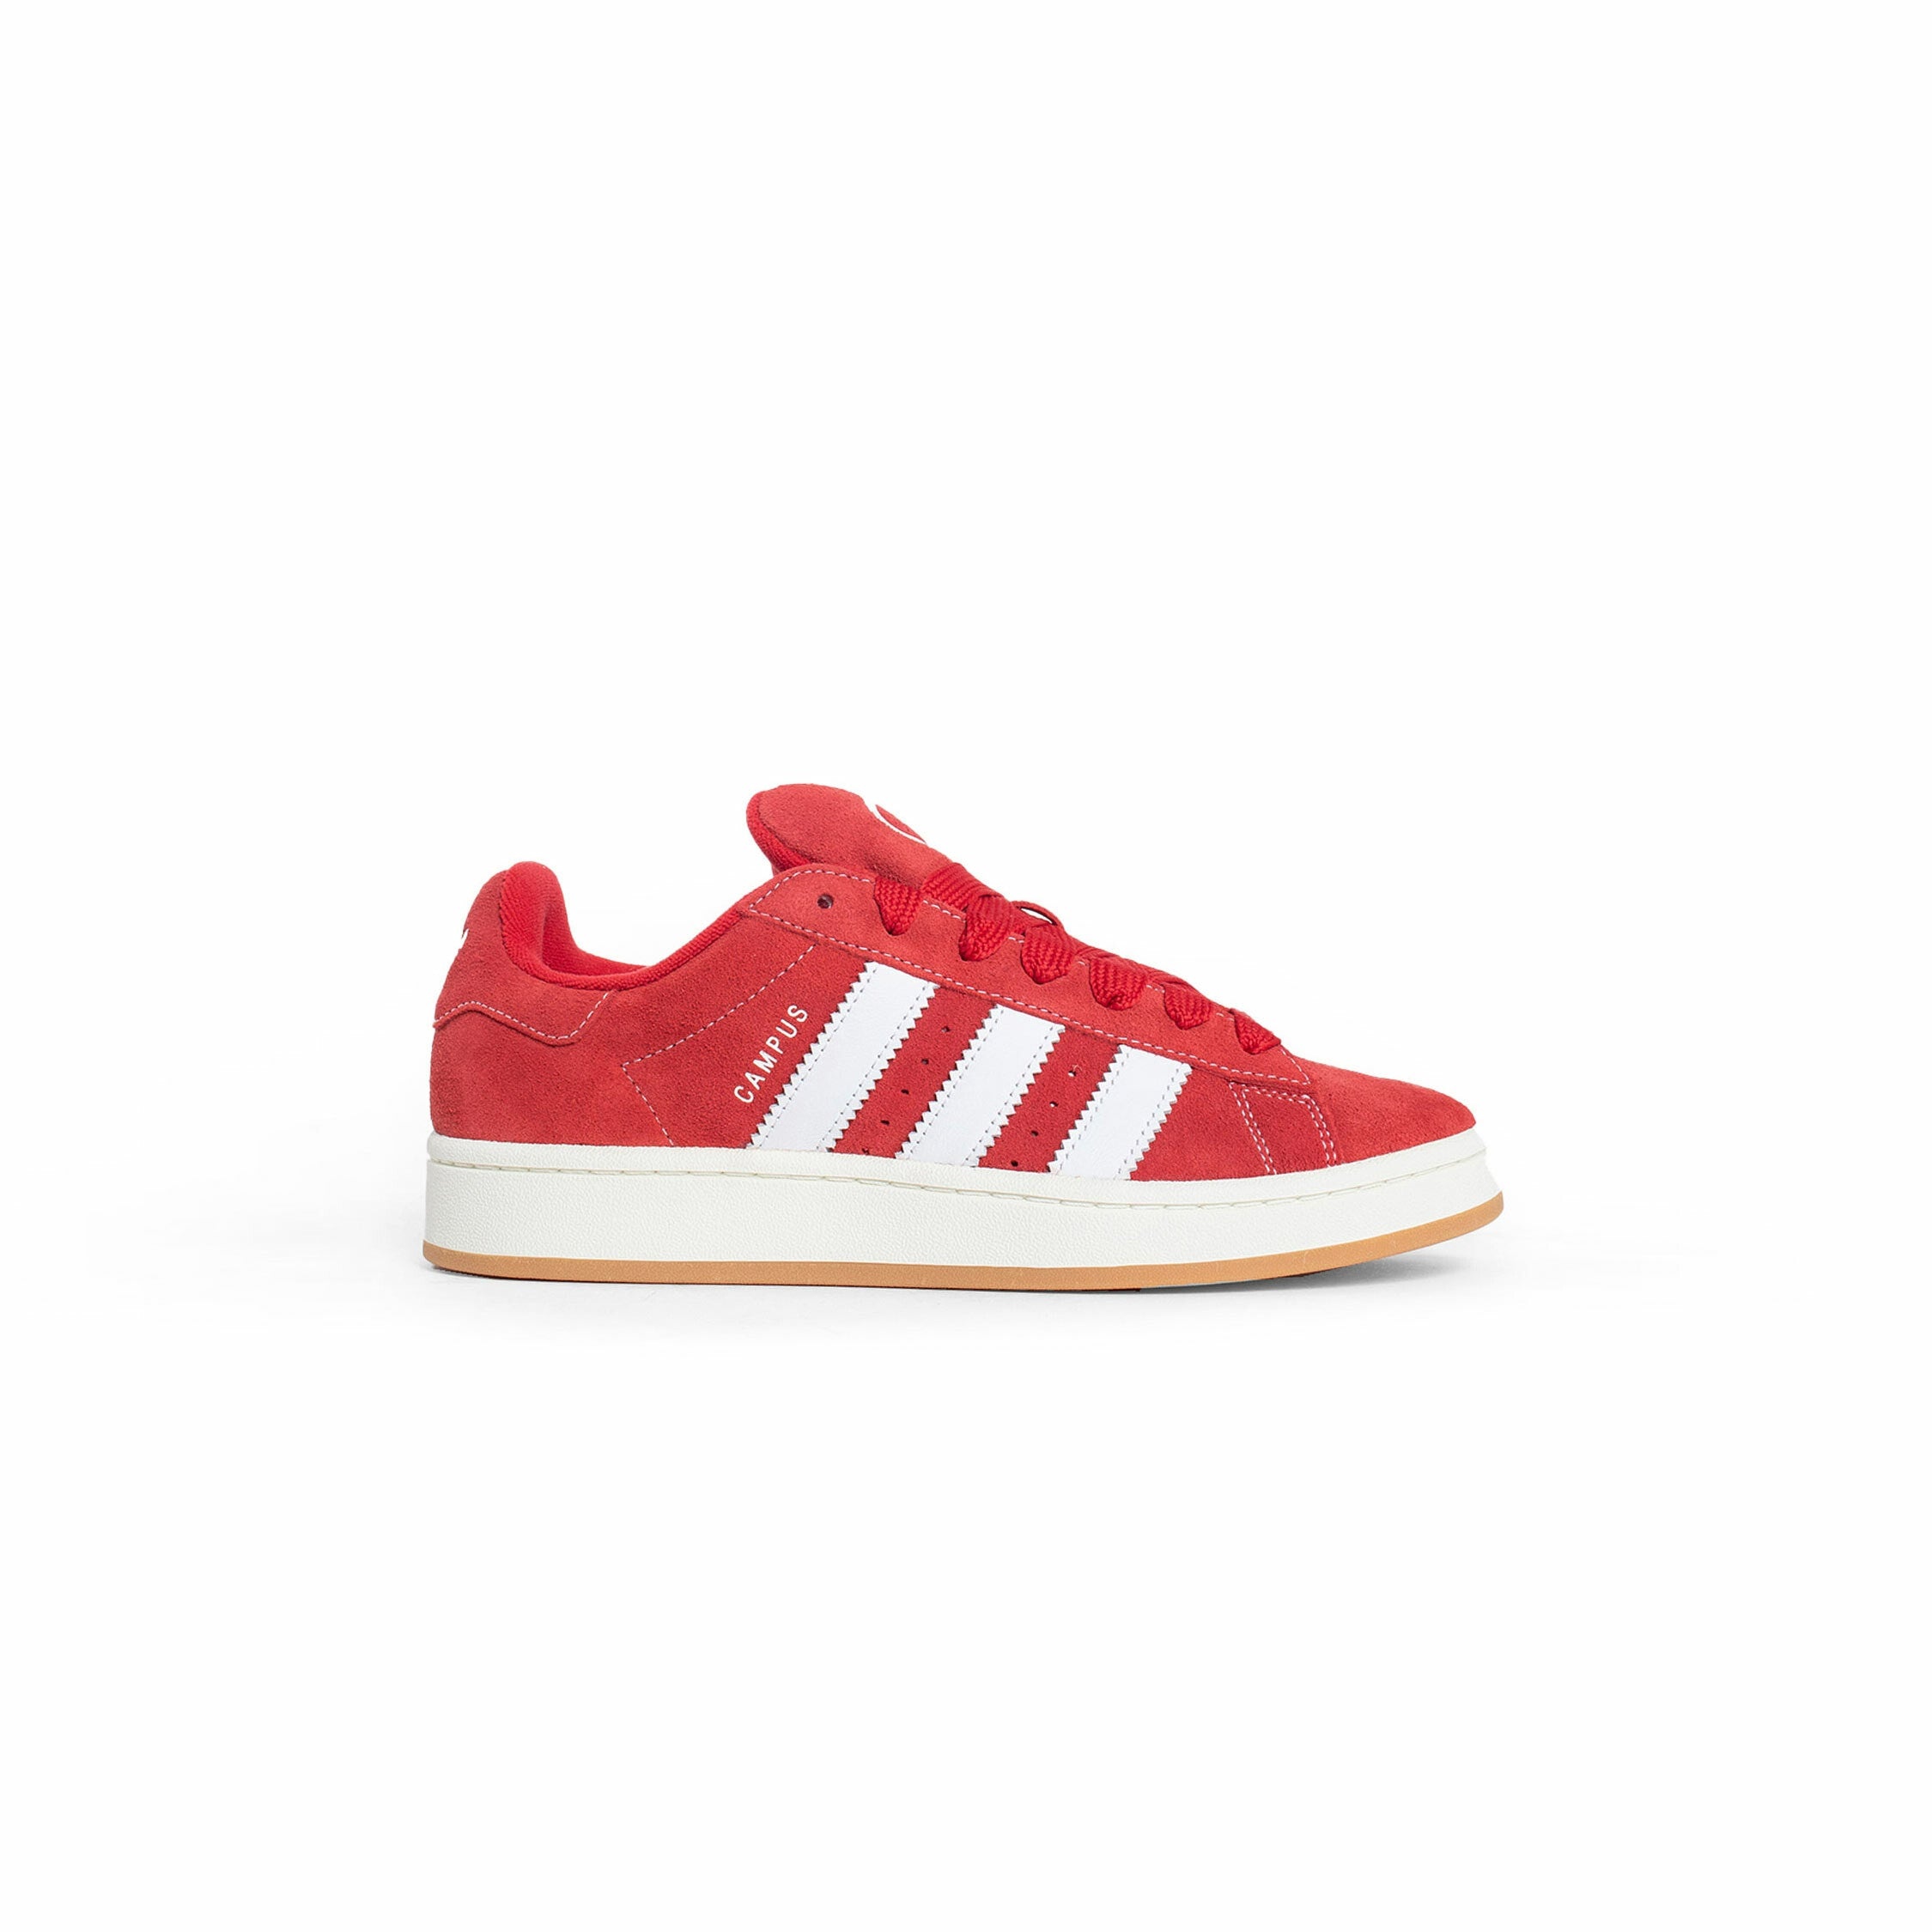 ADIDAS UNISEX RED SNEAKERS - 8